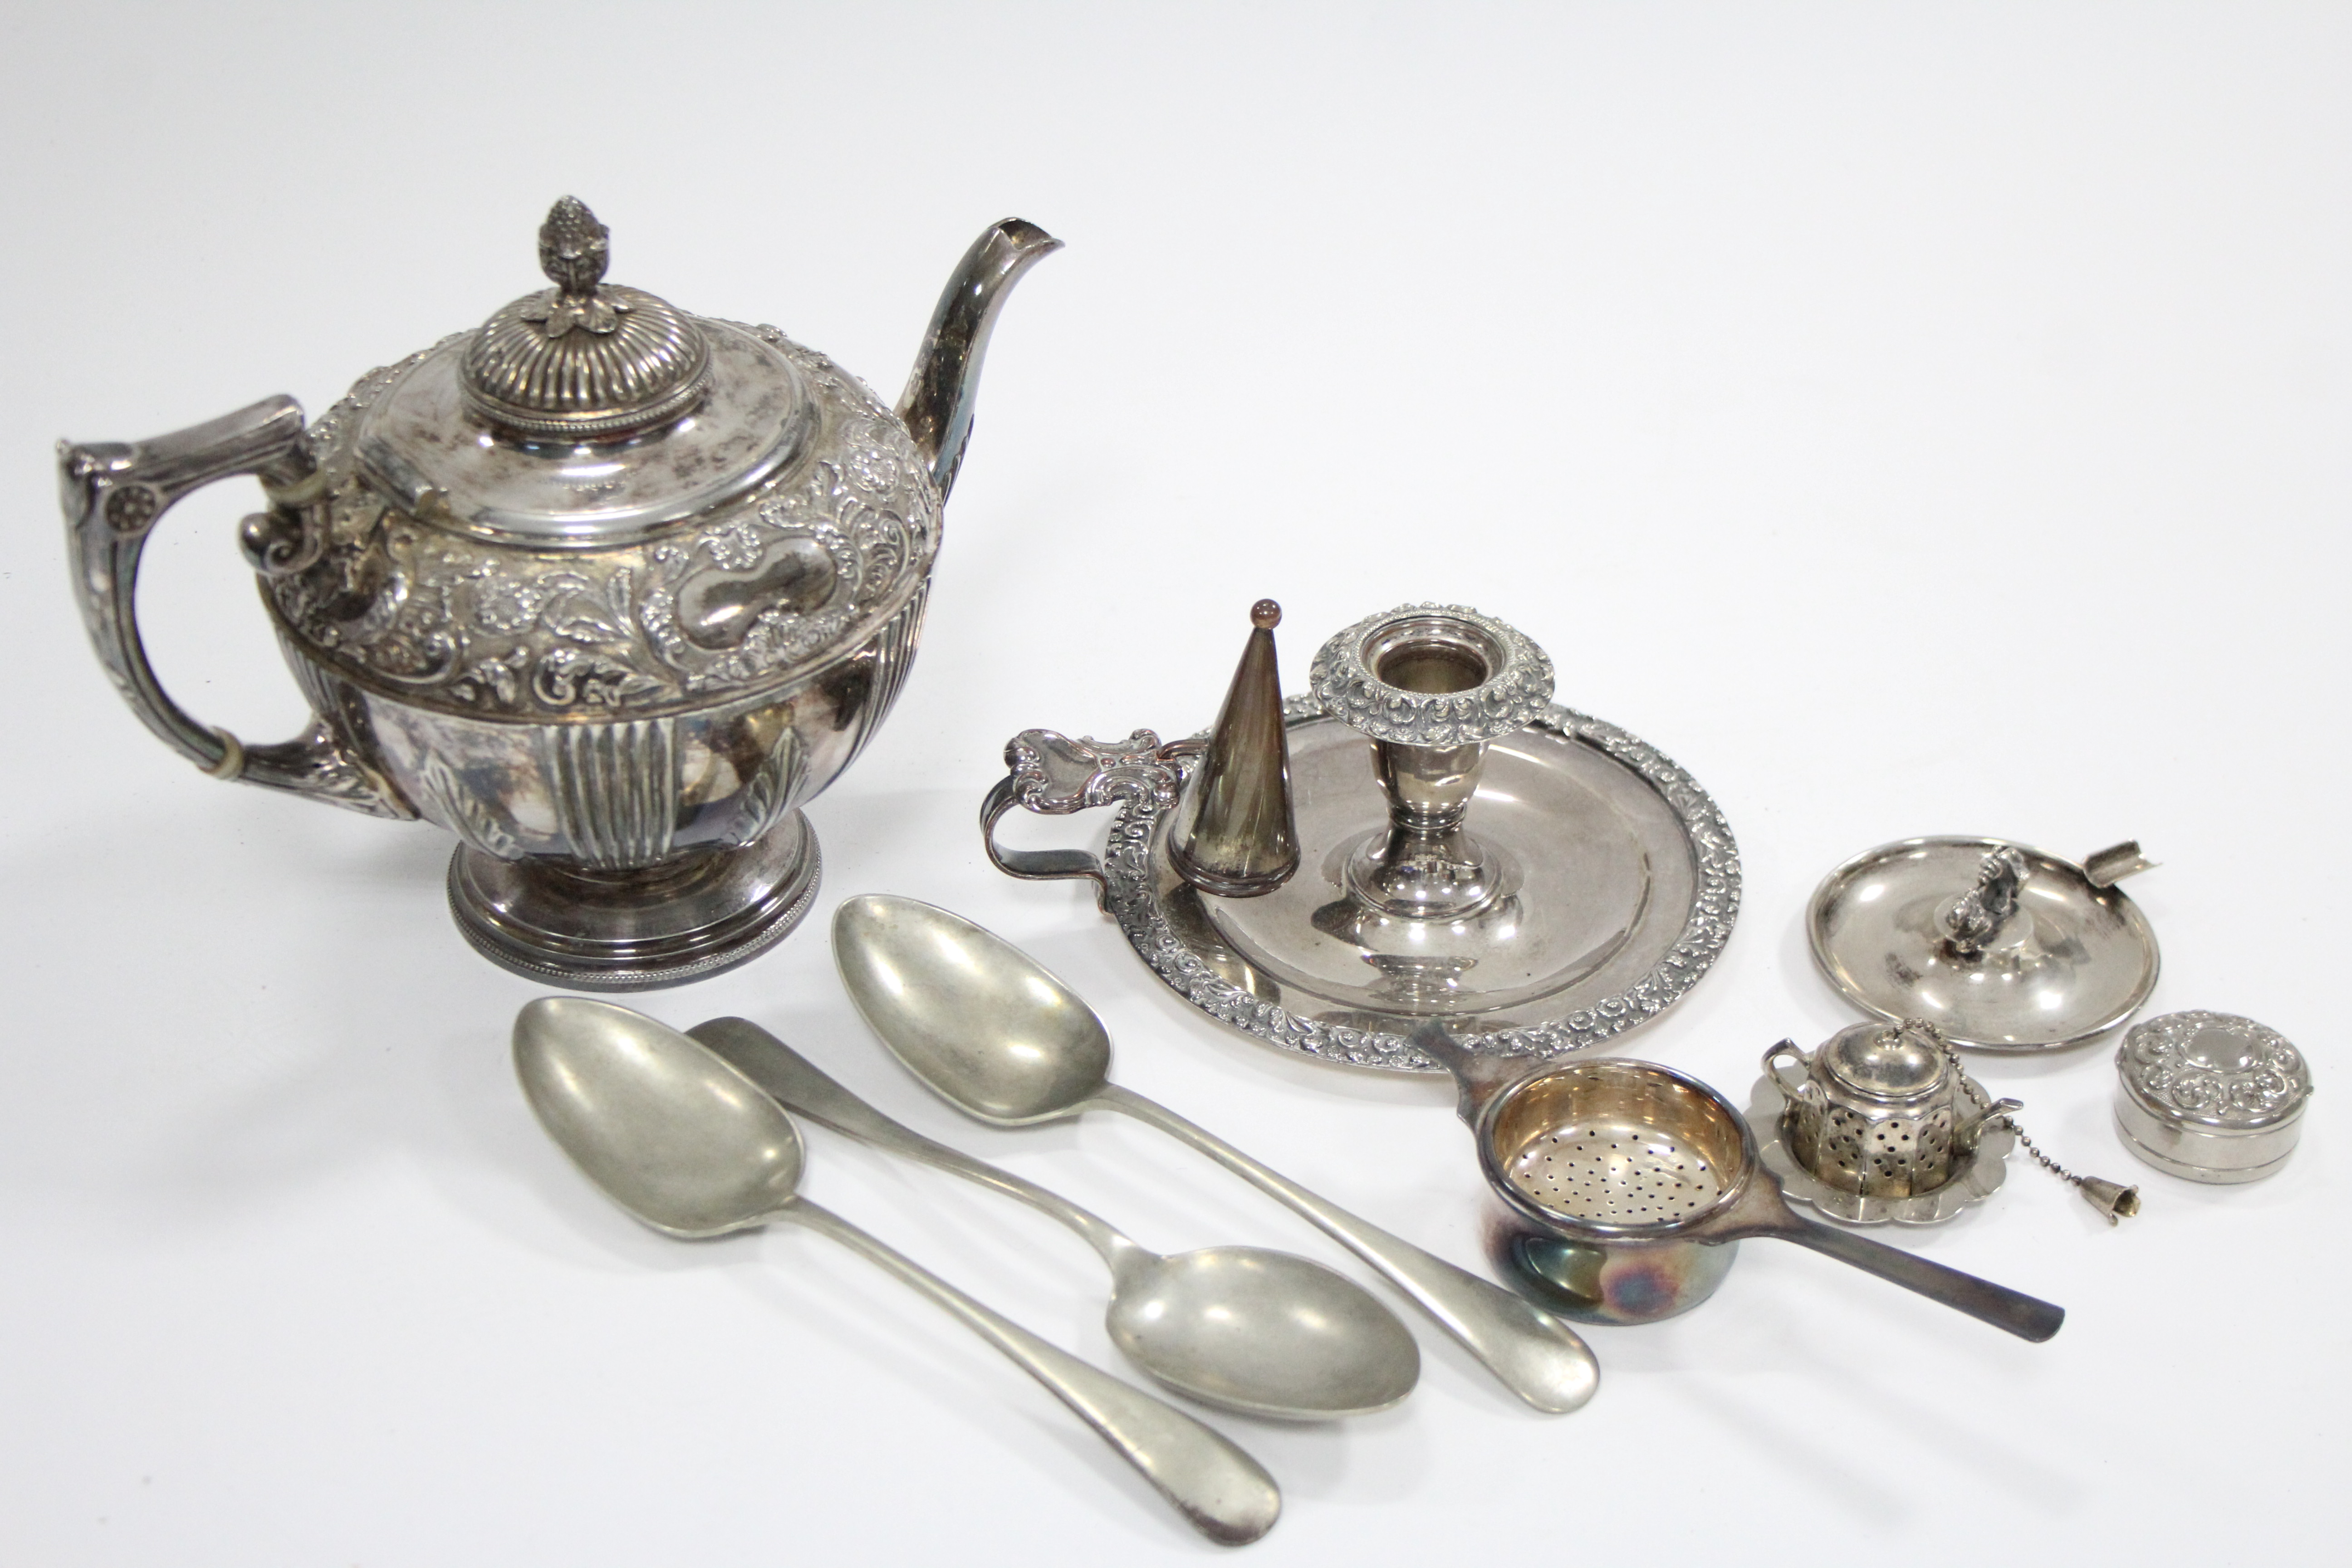 A circular embossed teapot; a chamber candlestick; an ashtray; various spoons, etc.